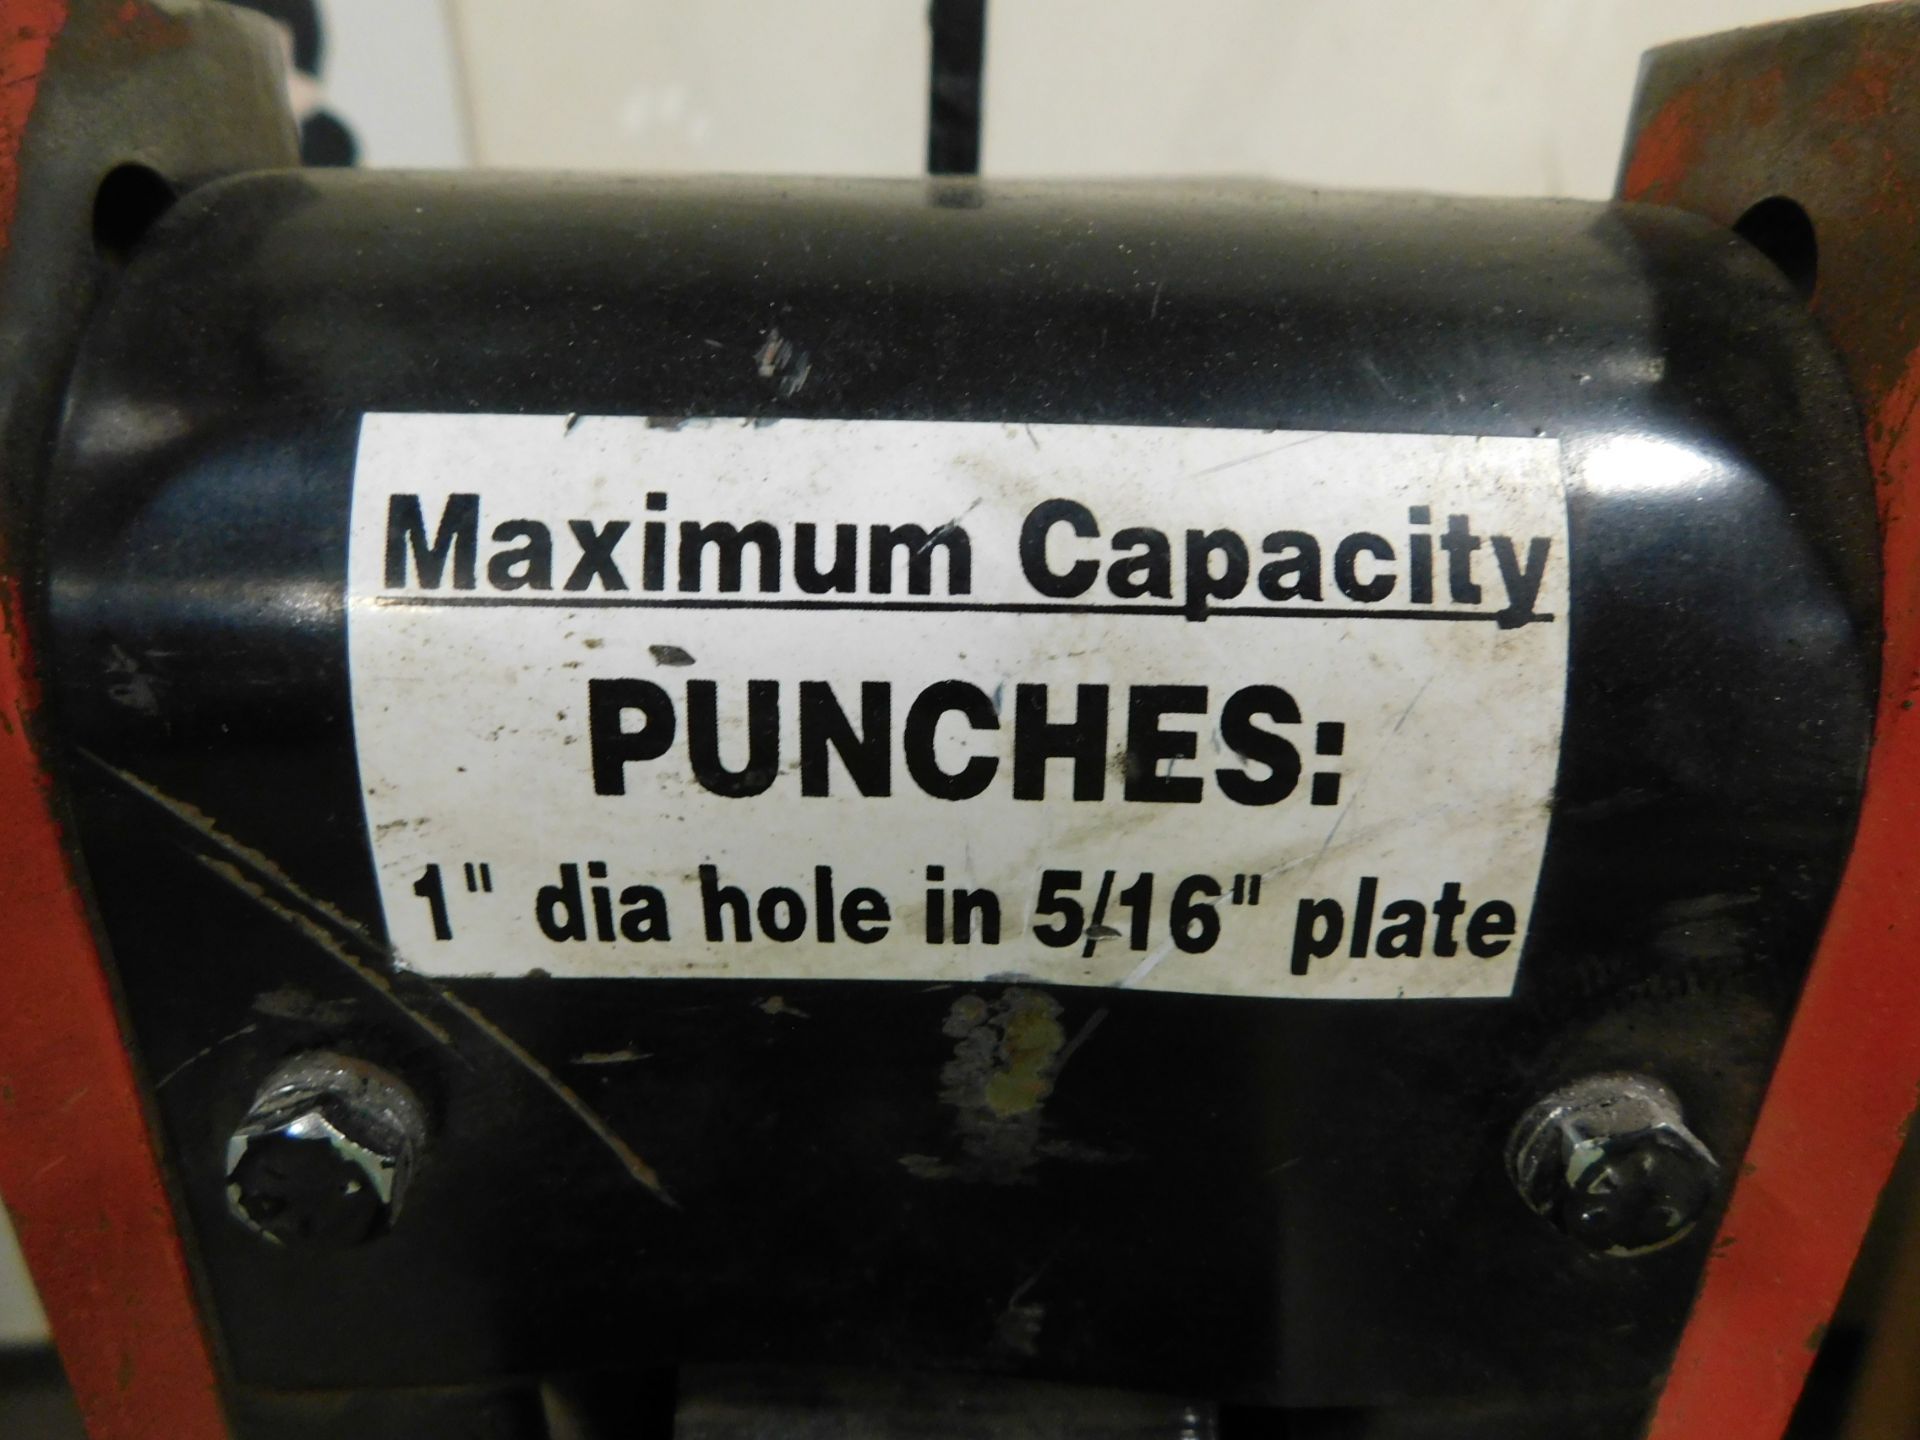 Cleveland Steel Tool 25-Ton Hydraulic Ironworker, SN 07772506, Max. Punch Cap: 1" Diameter Hole in - Image 6 of 9